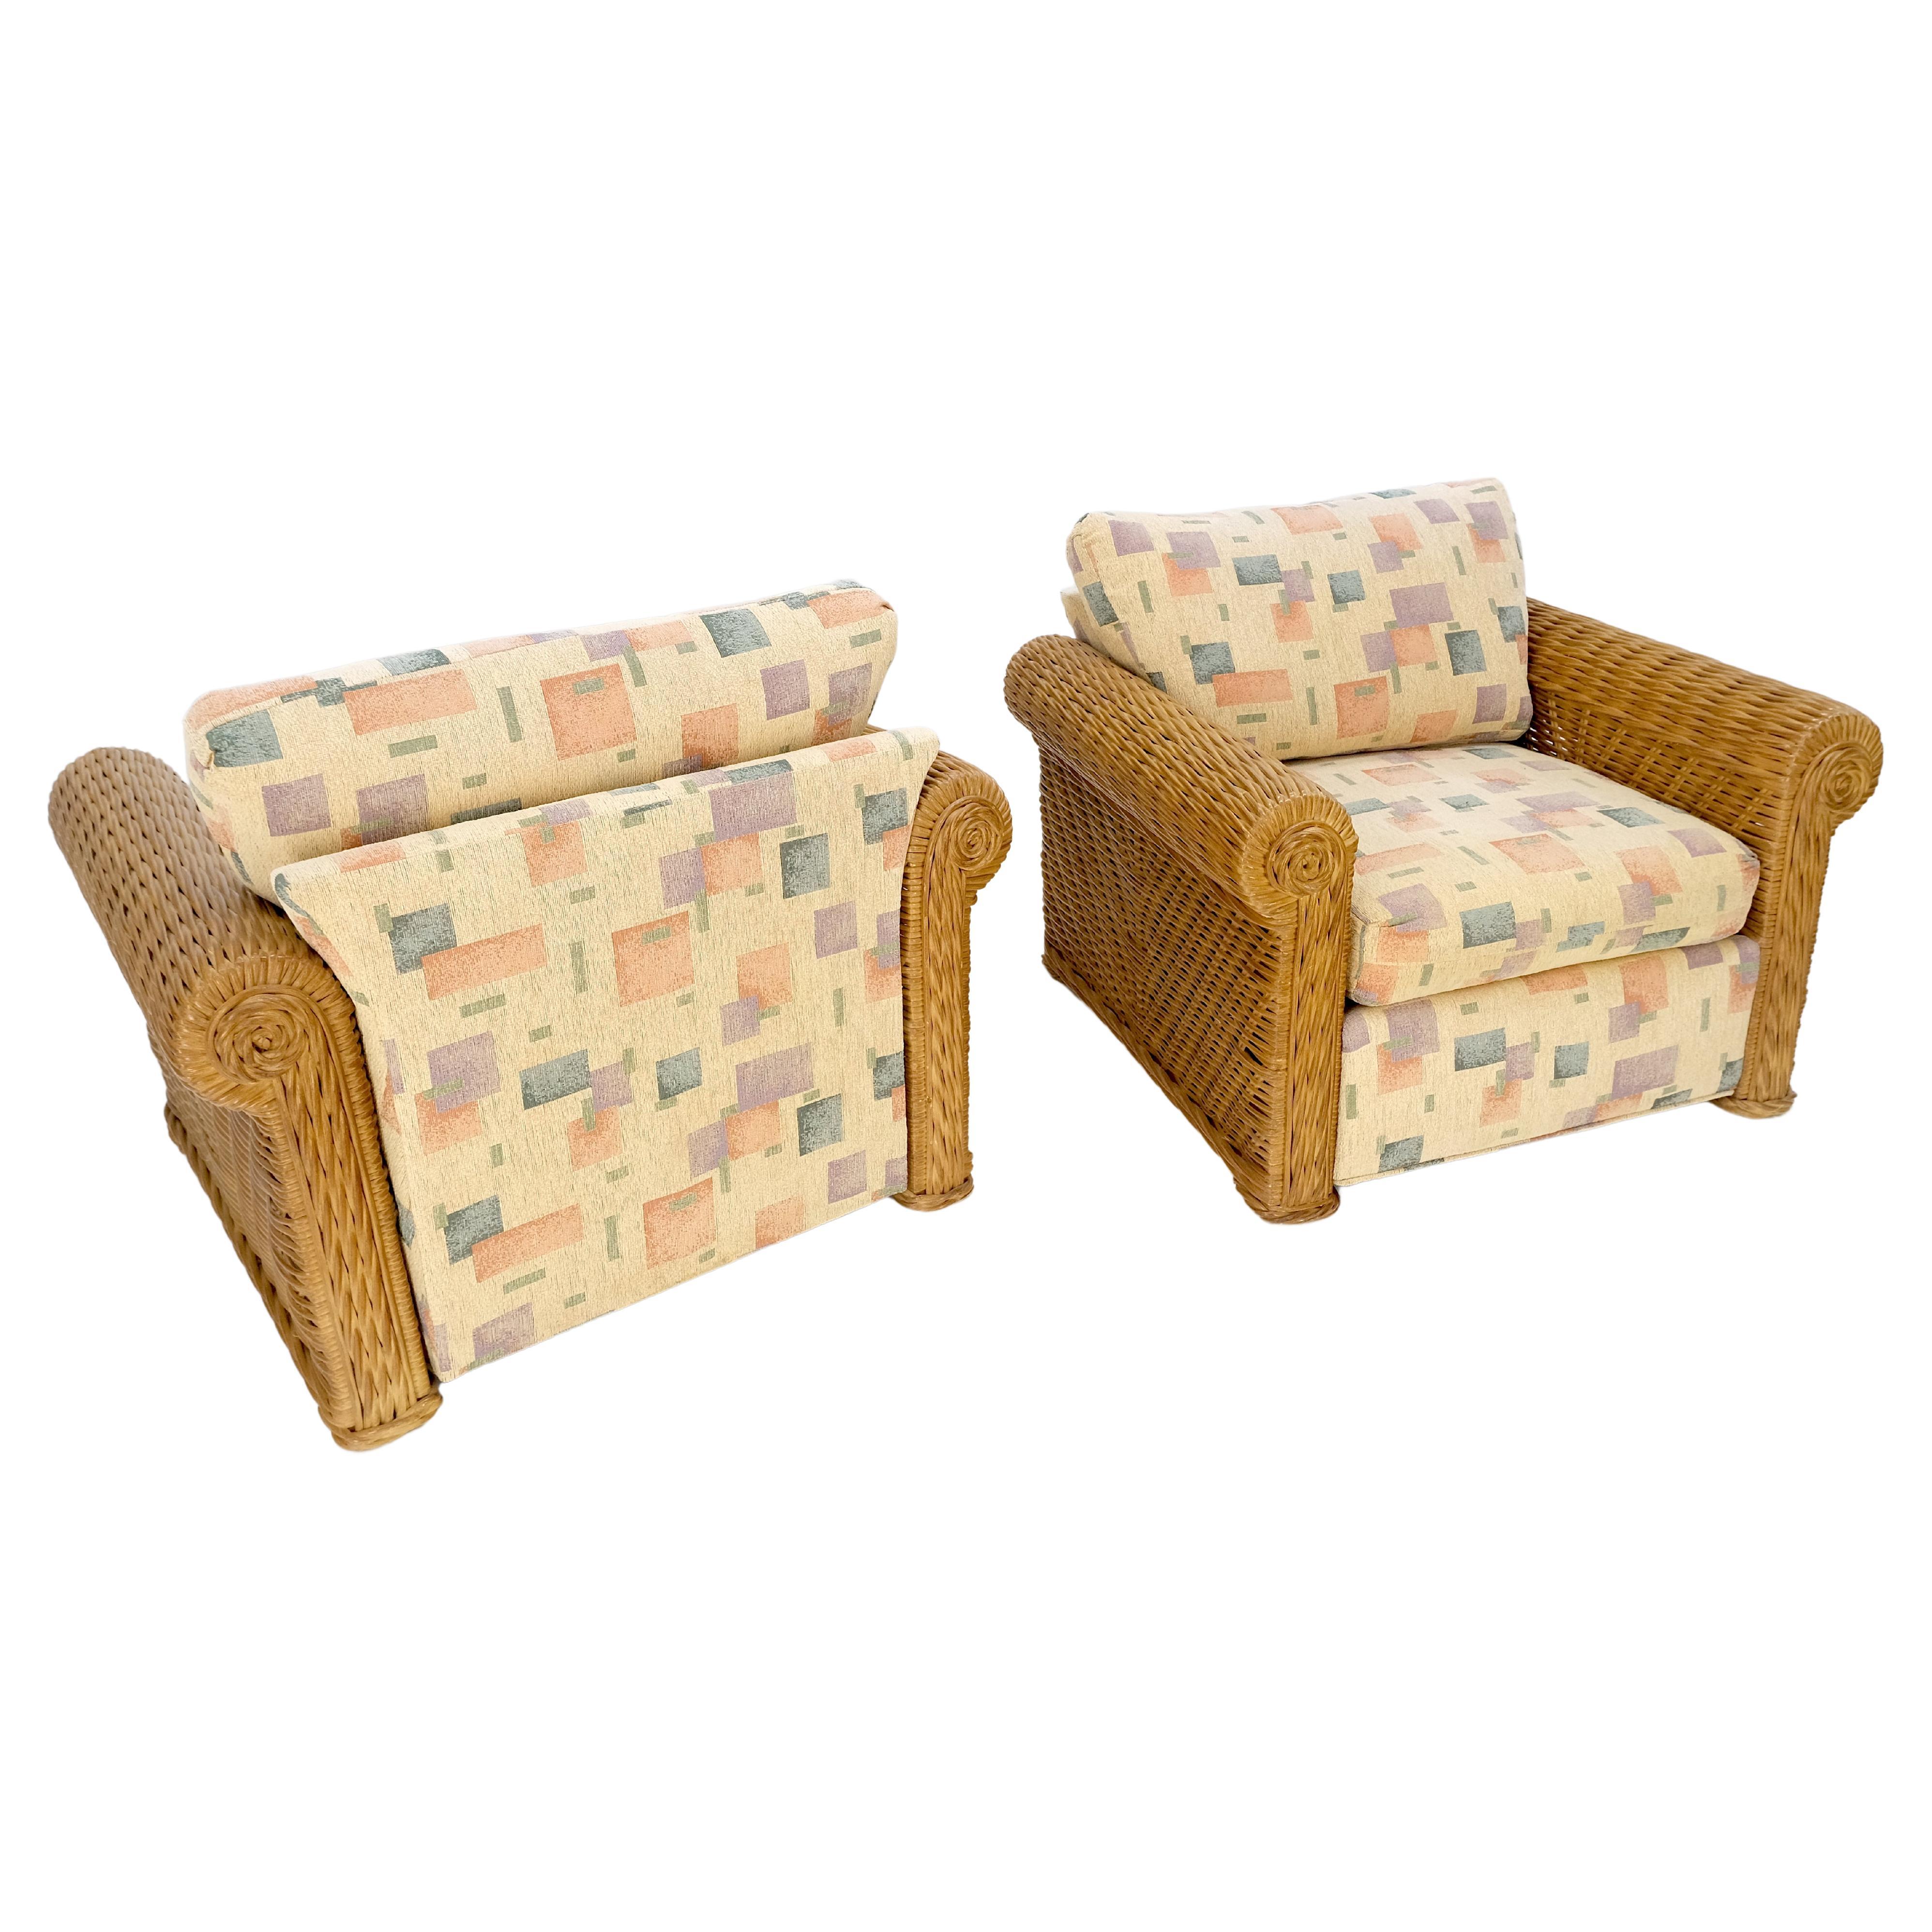 Pair Decorative c1970s Oversize Rttan Bamboo Wicker Club Lounge Chairs Mint!
Geometric abstract modern upholstery fabric.